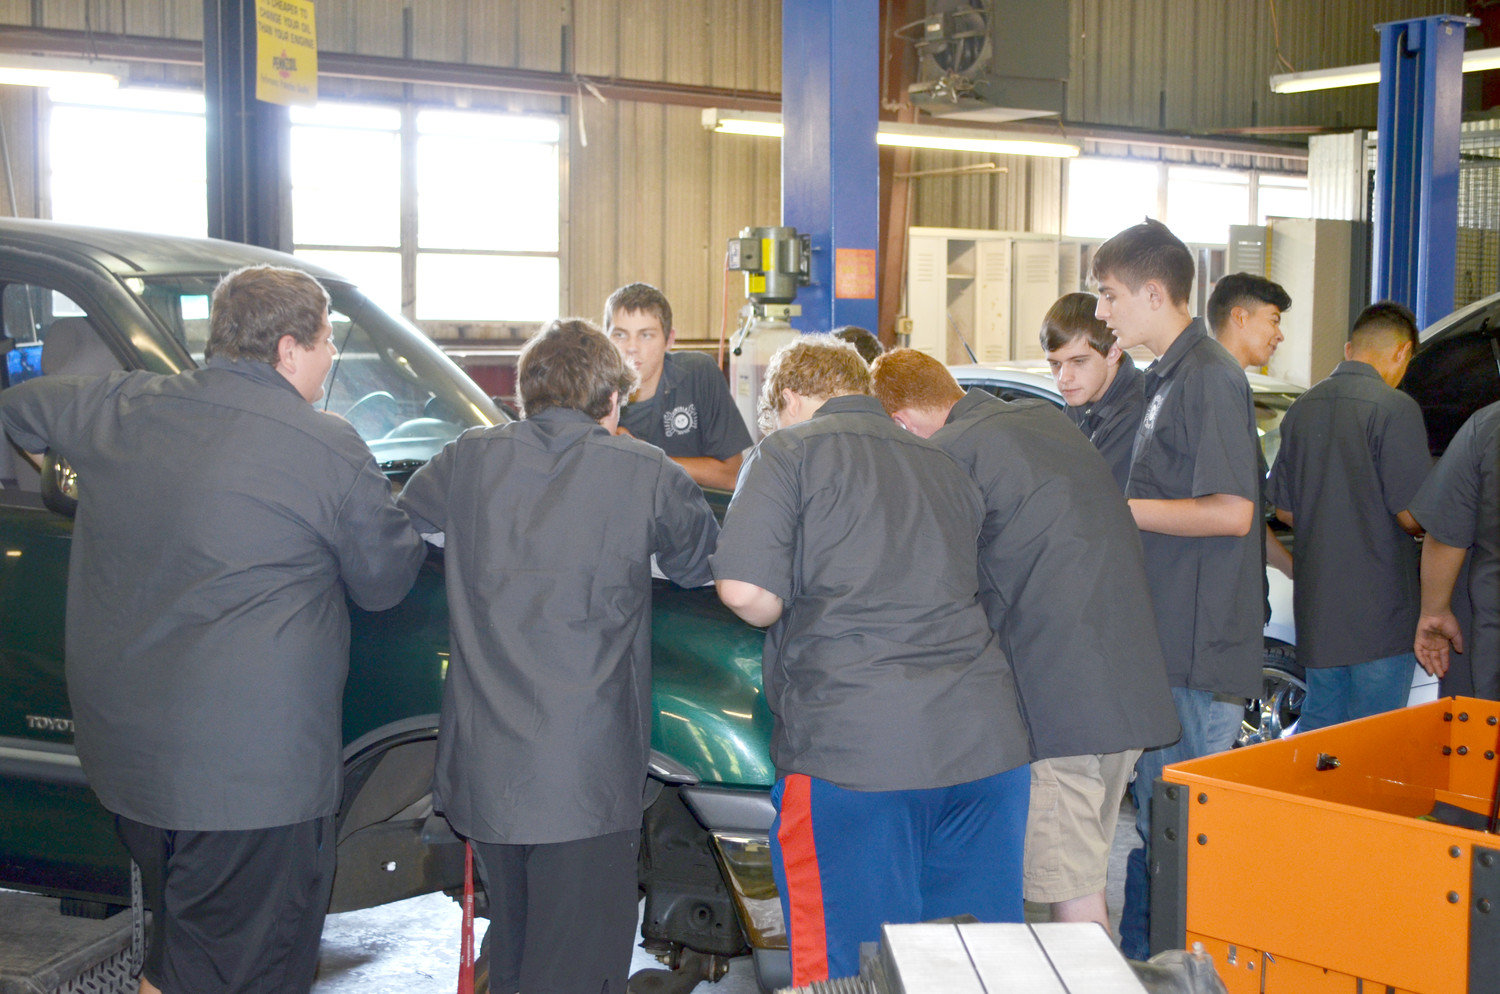 Mineola High Auto Tech students prepare to lift an engine. (Monitor photo by Hank Murphy).